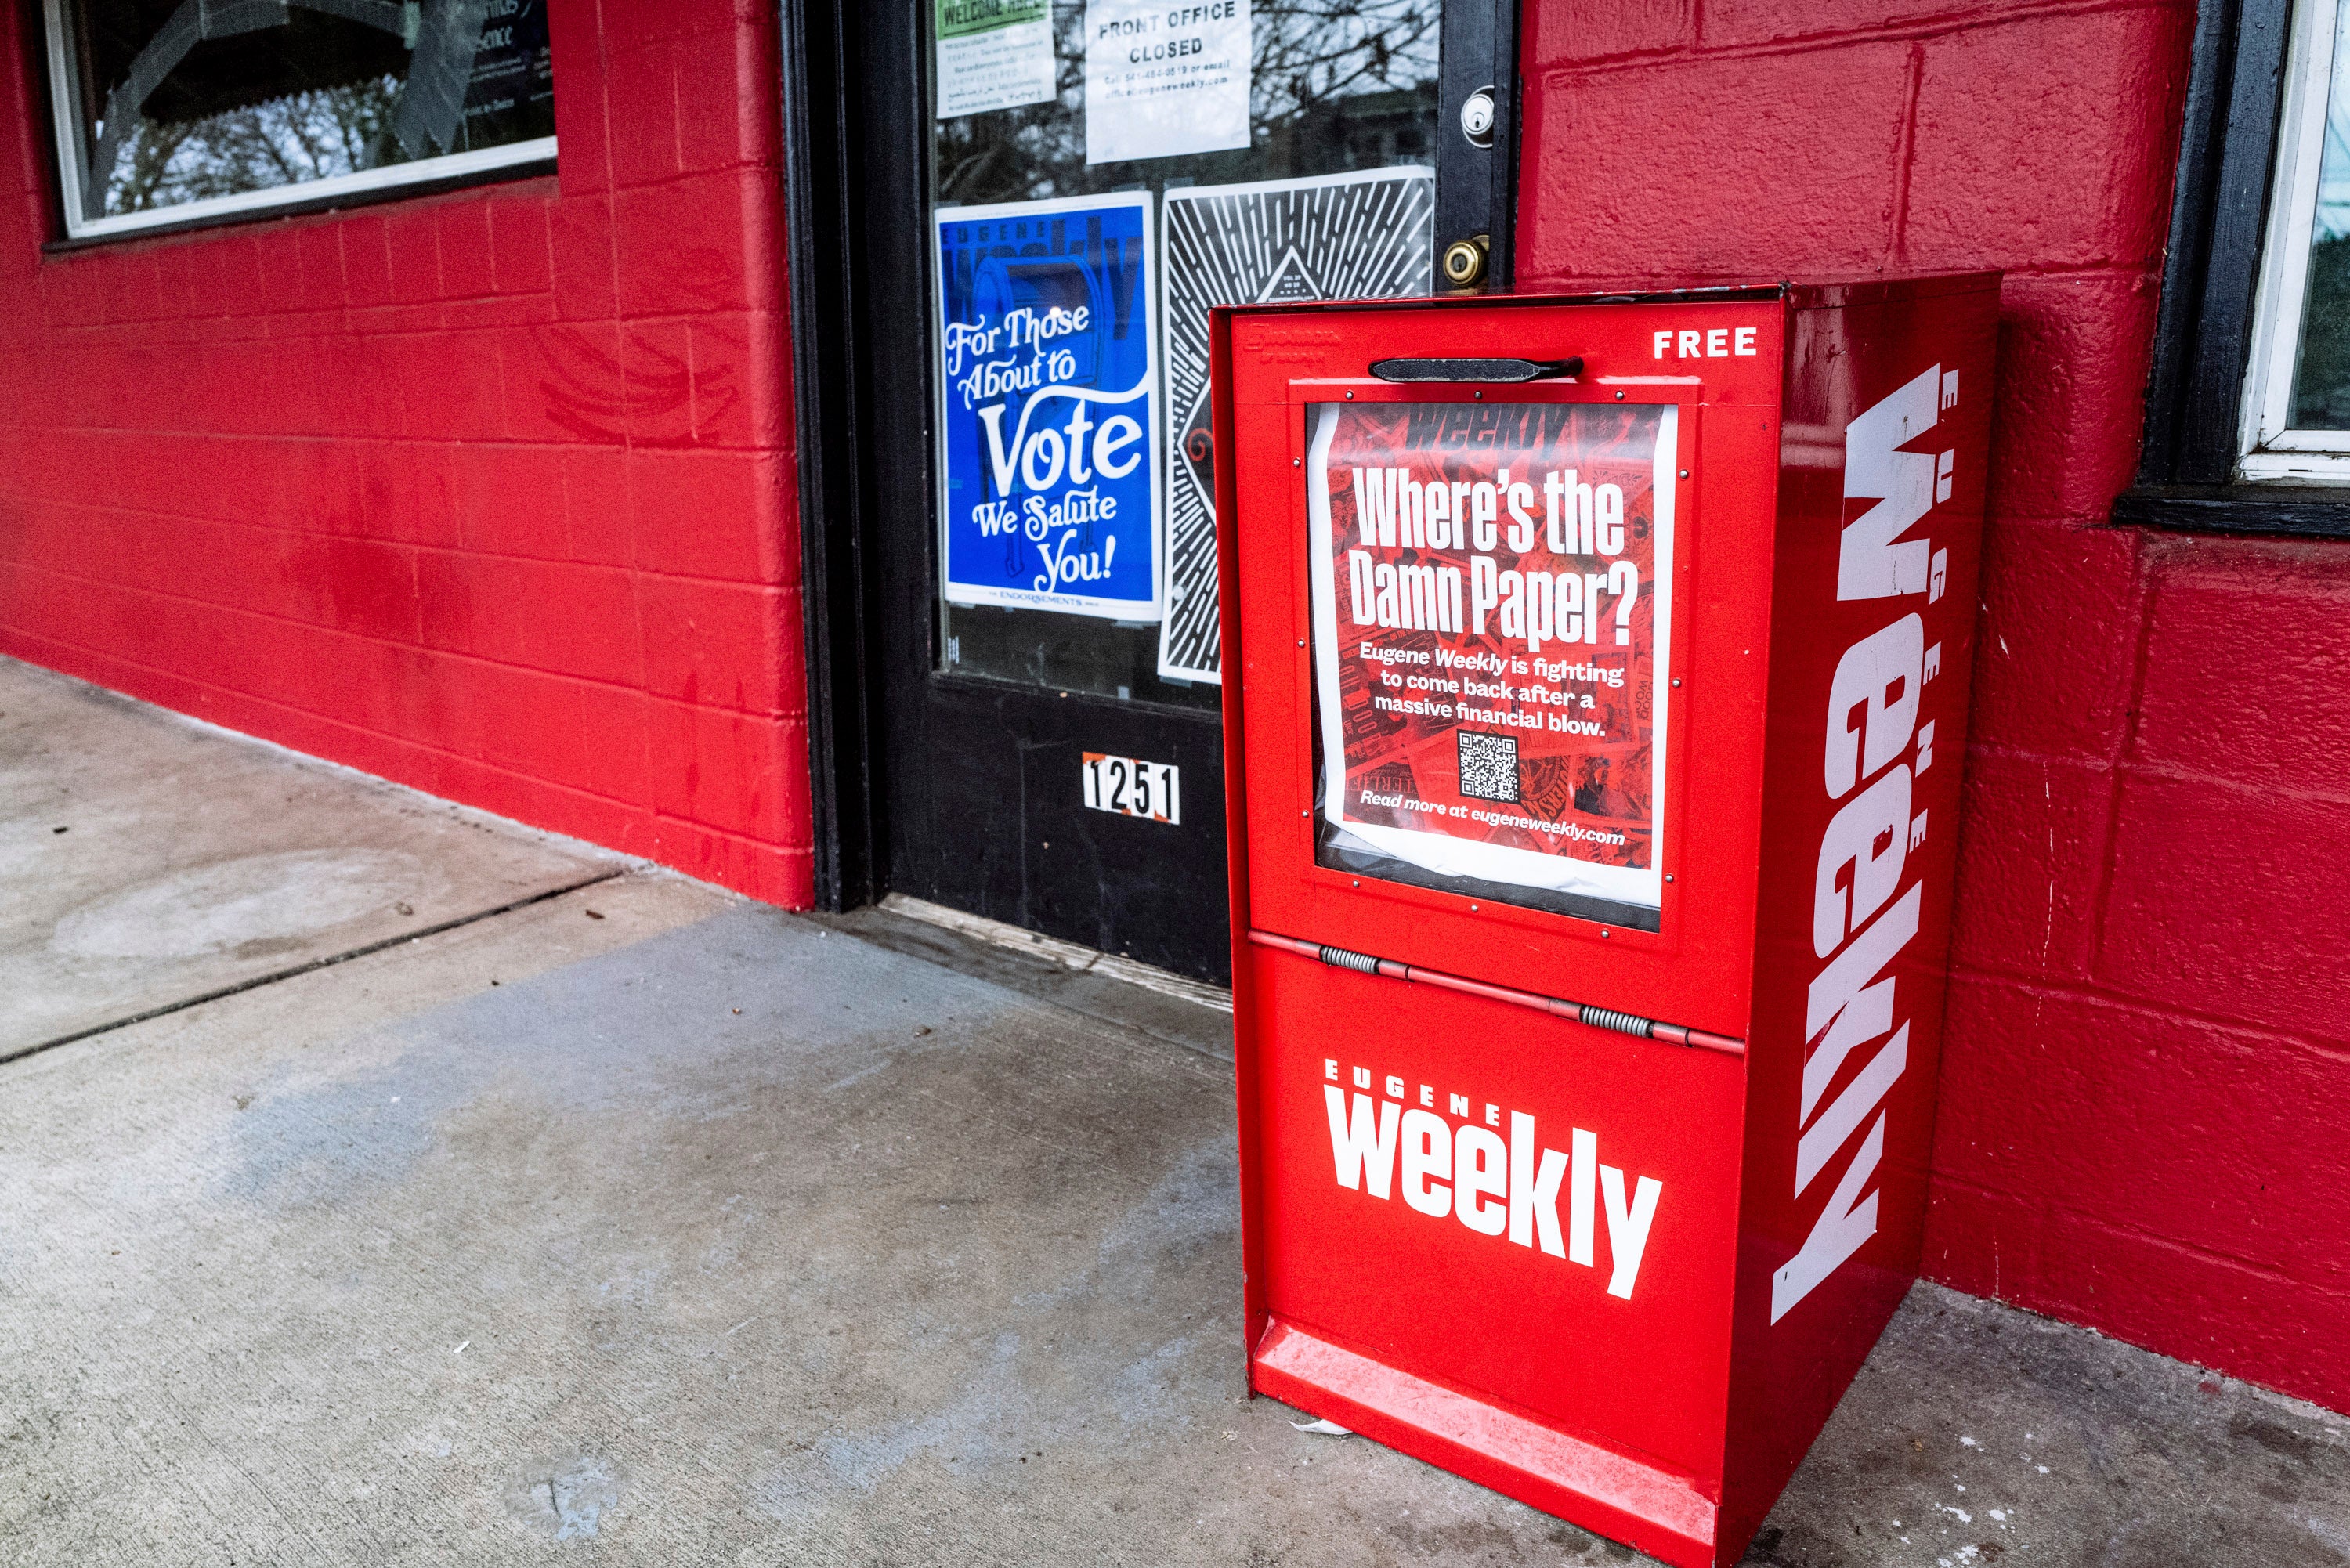 The Eugene Weekly laid off all its staff and halted print production after allegedly discovering an ex-employee embezzled thousands of dollars